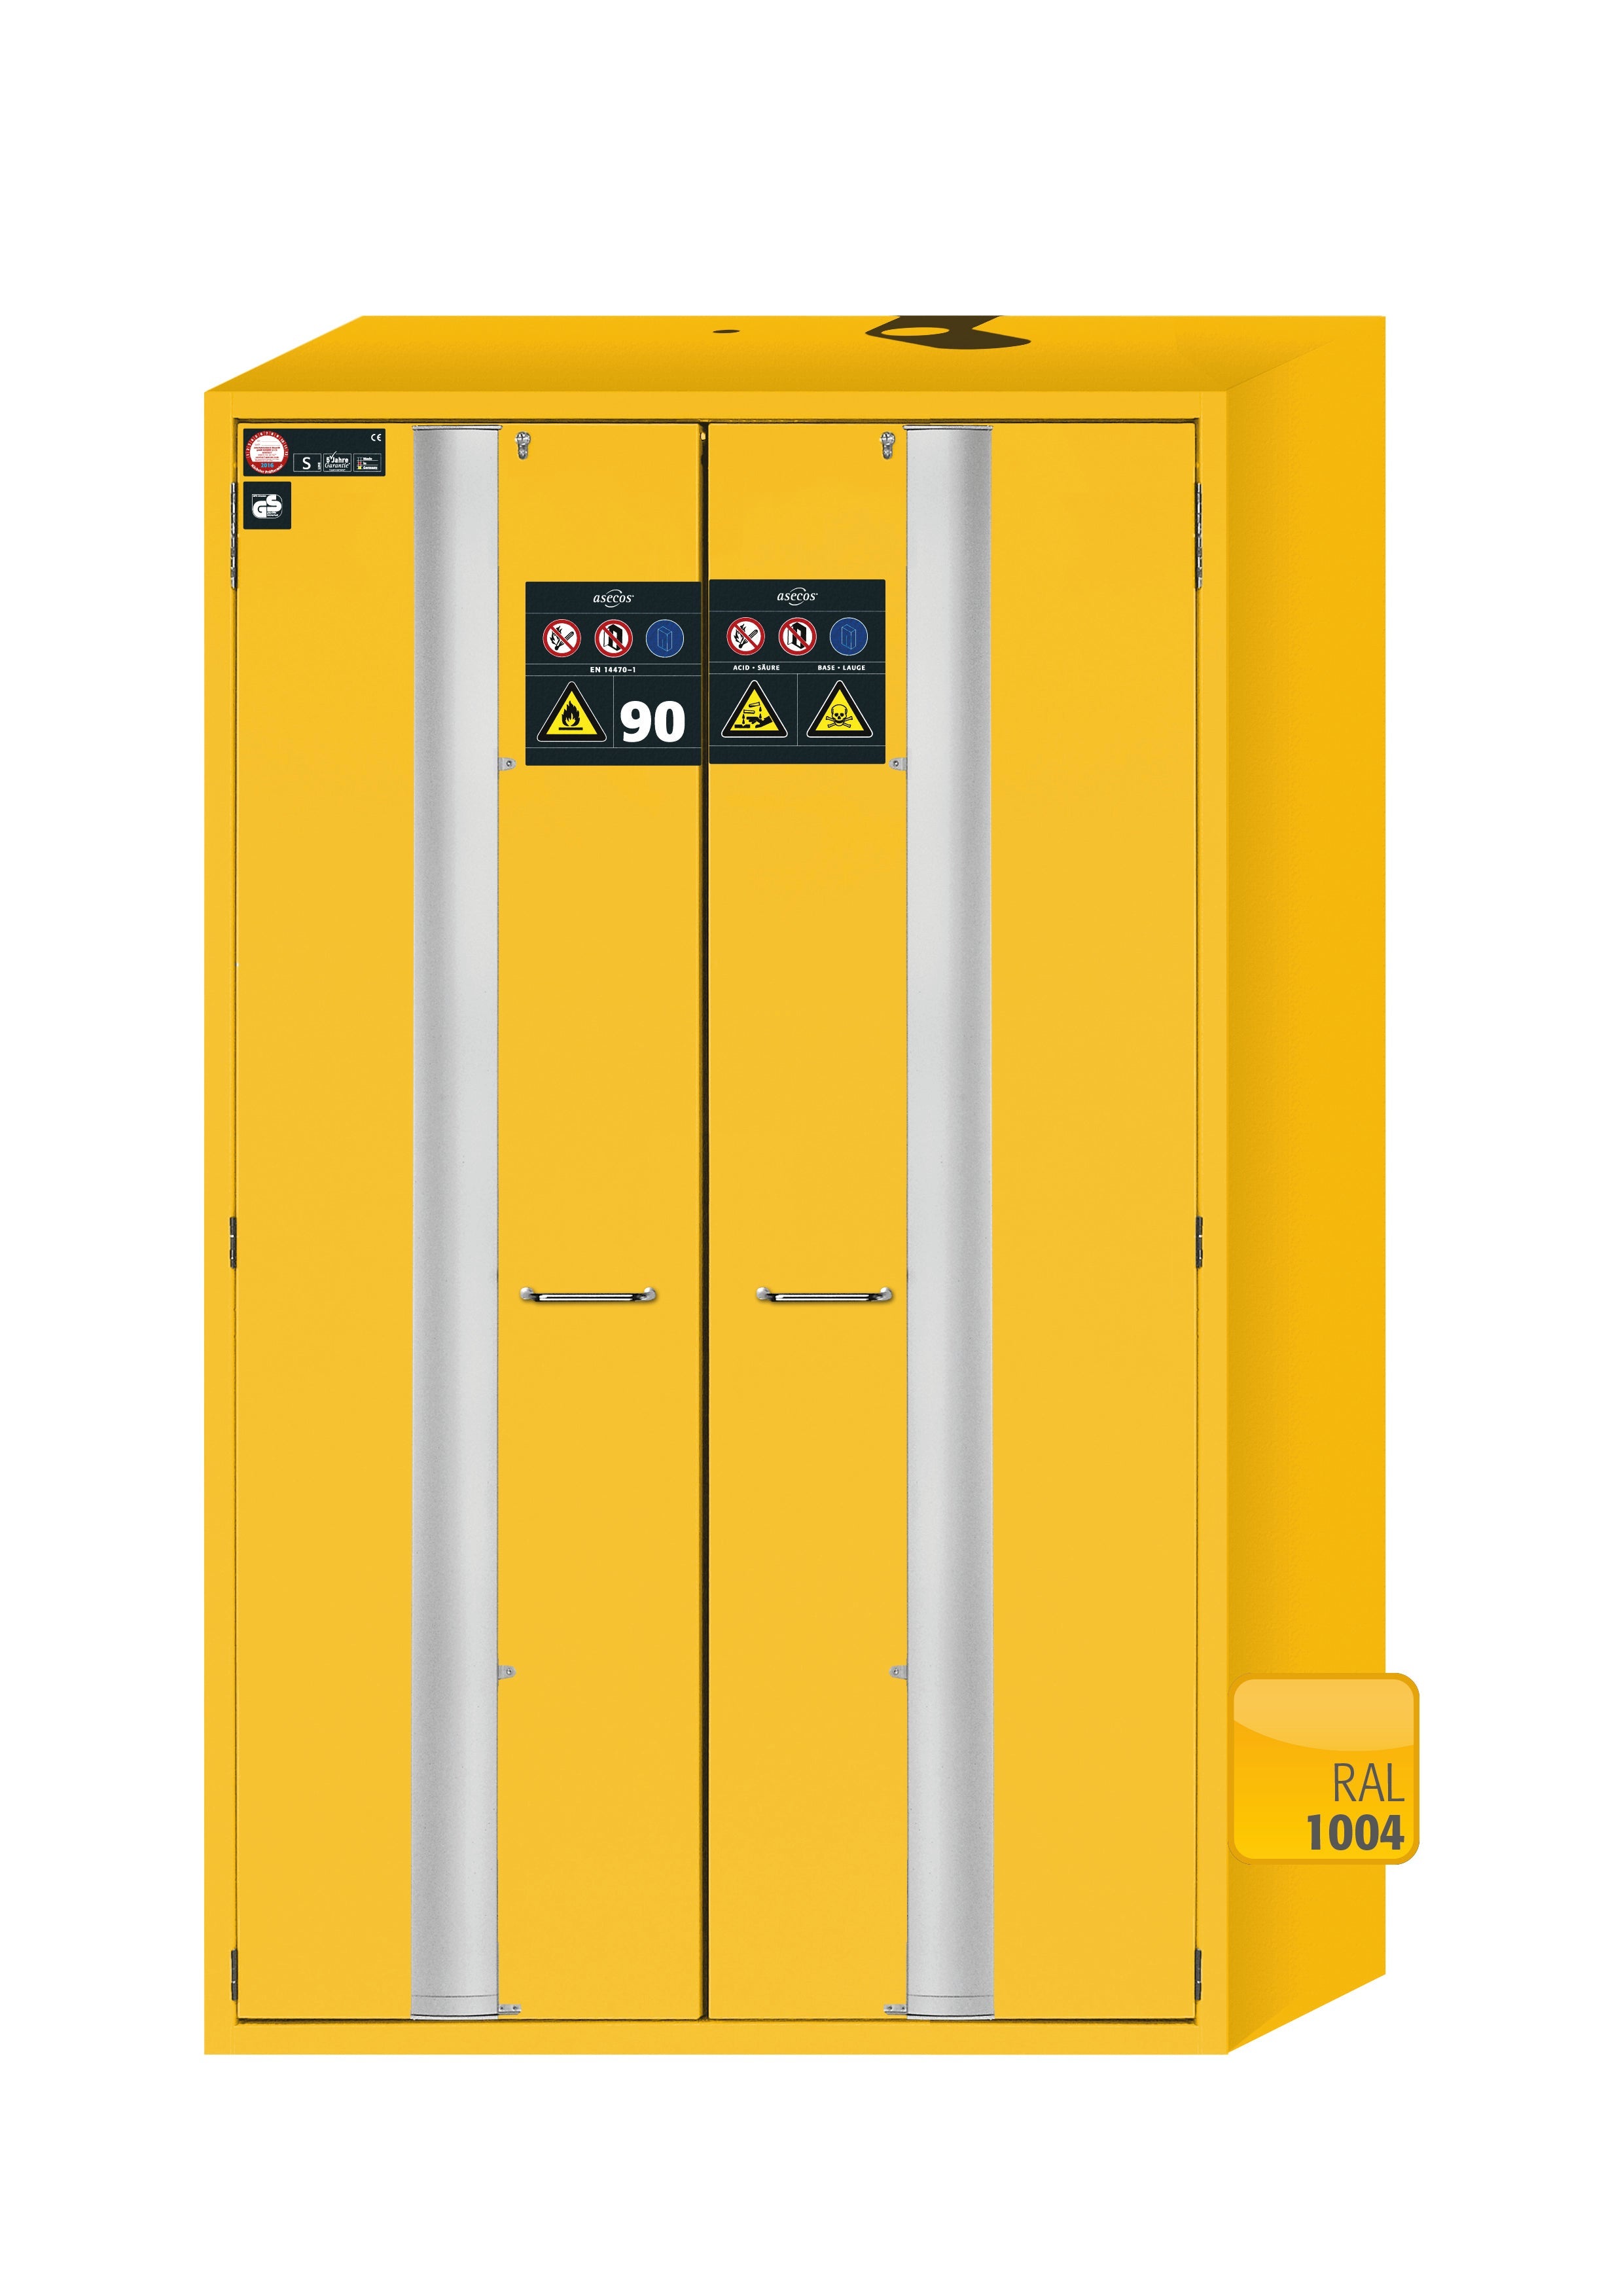 Type 90 safety cabinet S-PHOENIX-90 model S90.196.120.MV.FDAS in safety yellow RAL 1004 with 3x standard shelves (stainless steel 1.4301)